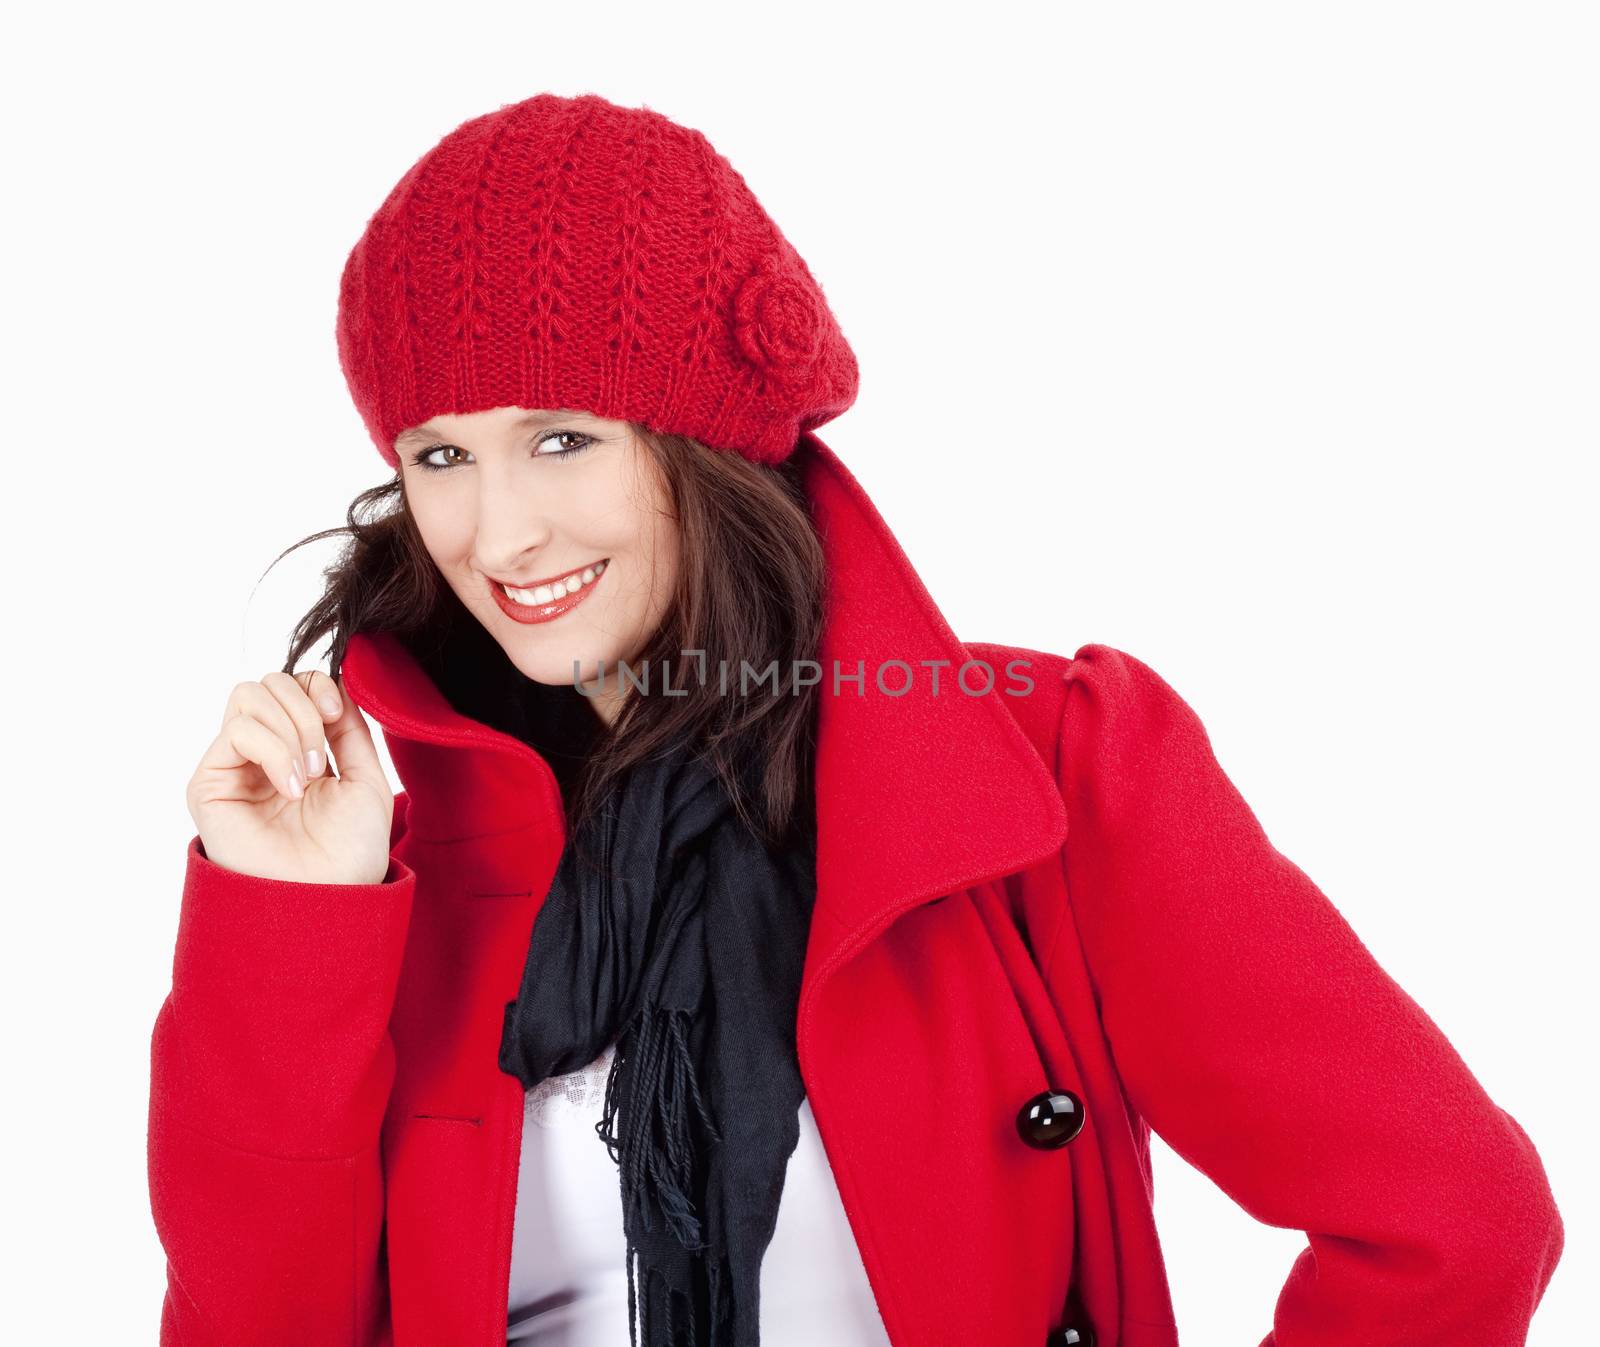 Young Woman in Red Coat and Cap Smiling by courtyardpix